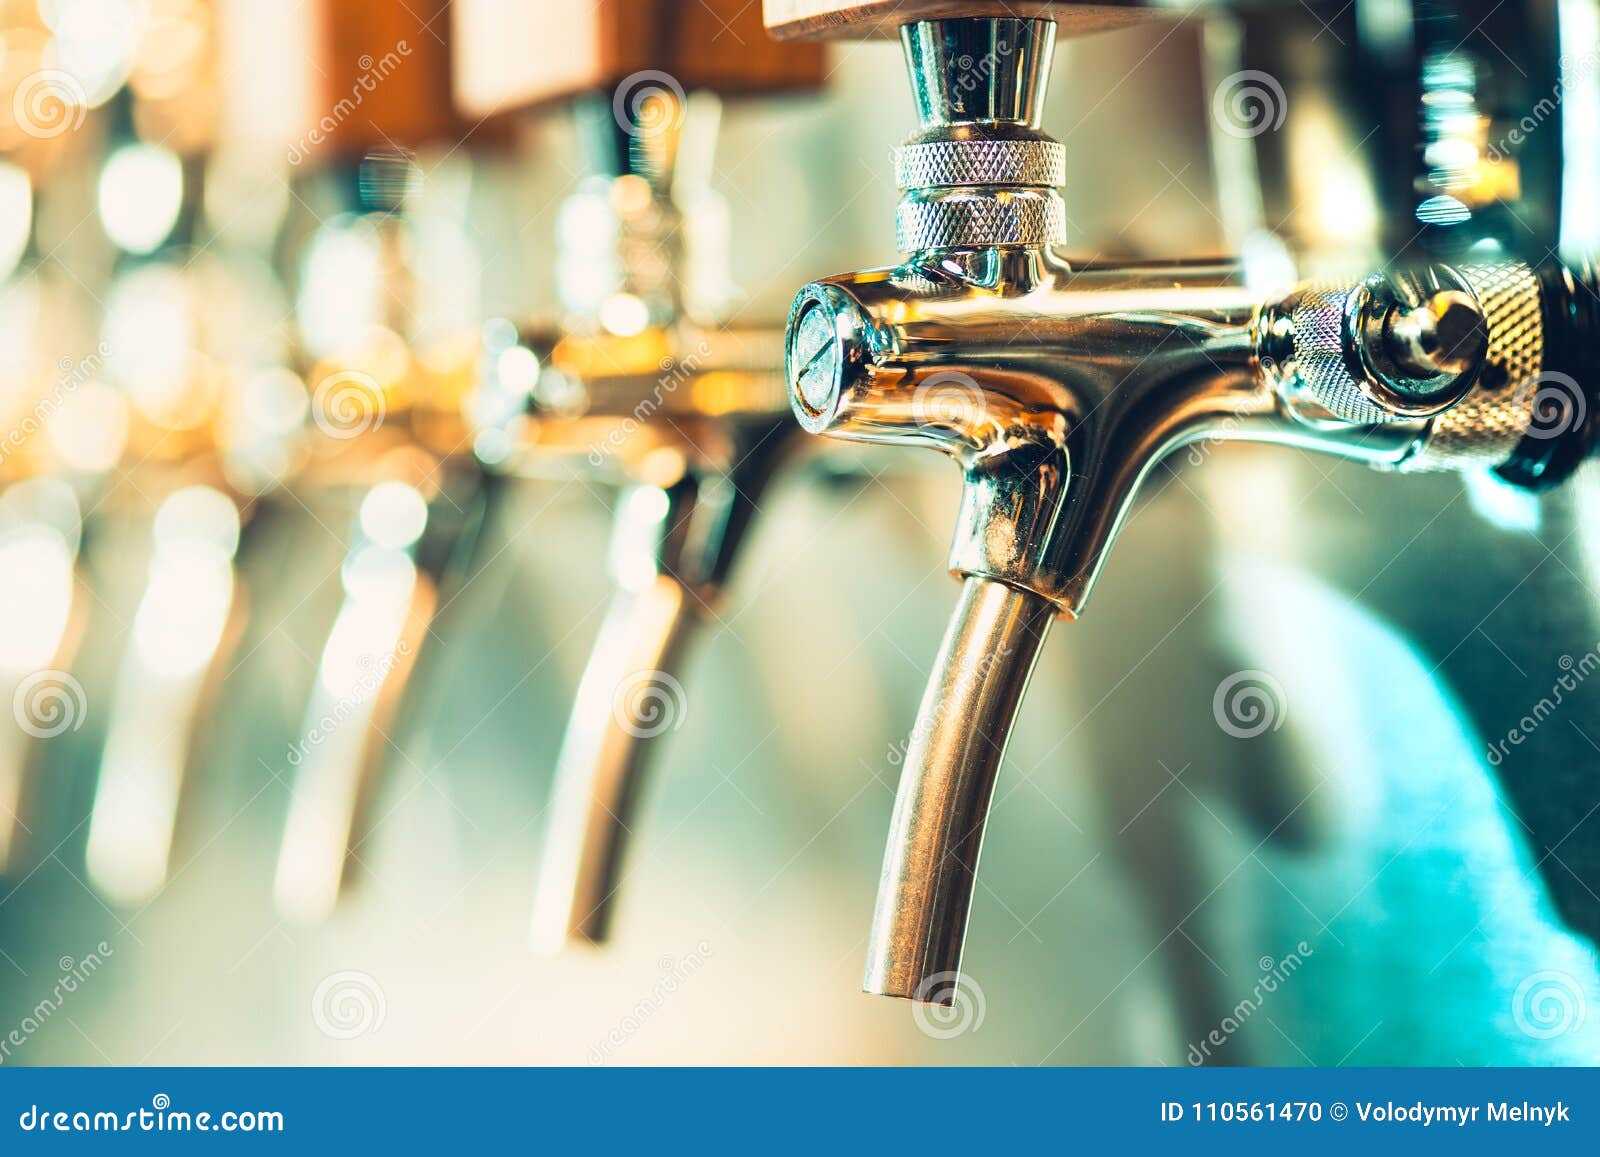 beer taps in a pub